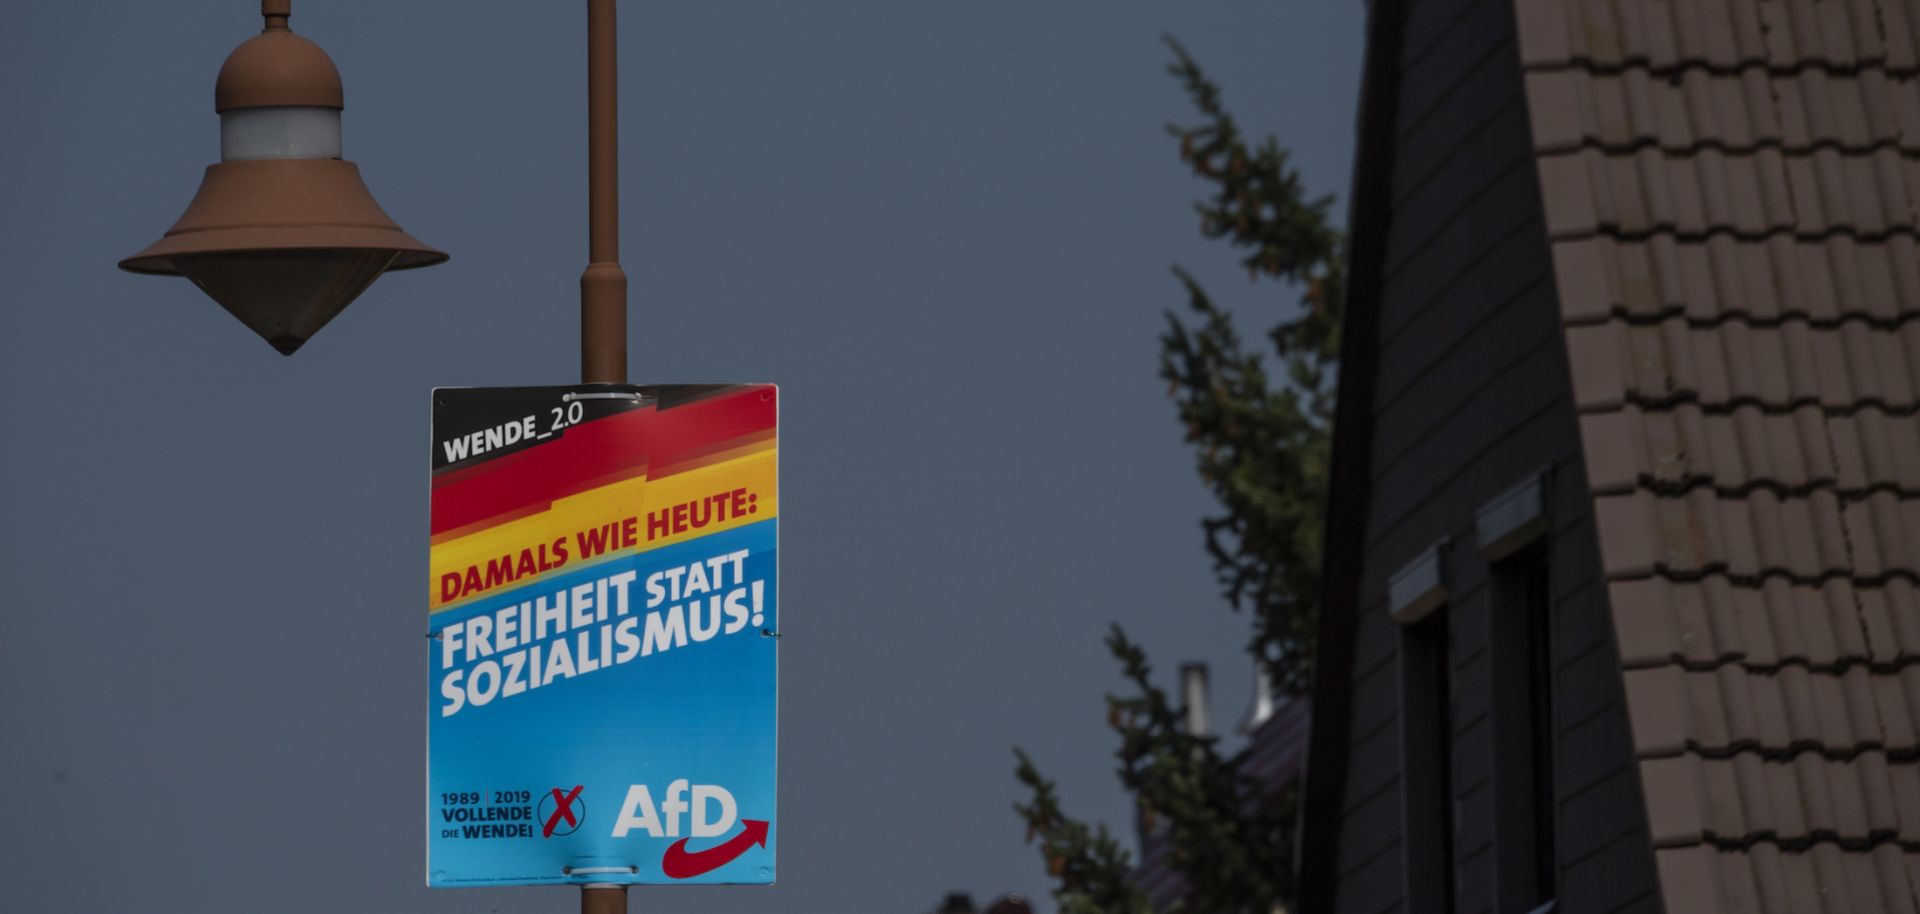 A campaign poster for the far-right Alternative for Germany (AfD) reads "Freedom instead of socialism" in Krewelin, Brandenburg, ahead of state elections on Sept. 1, 2019.